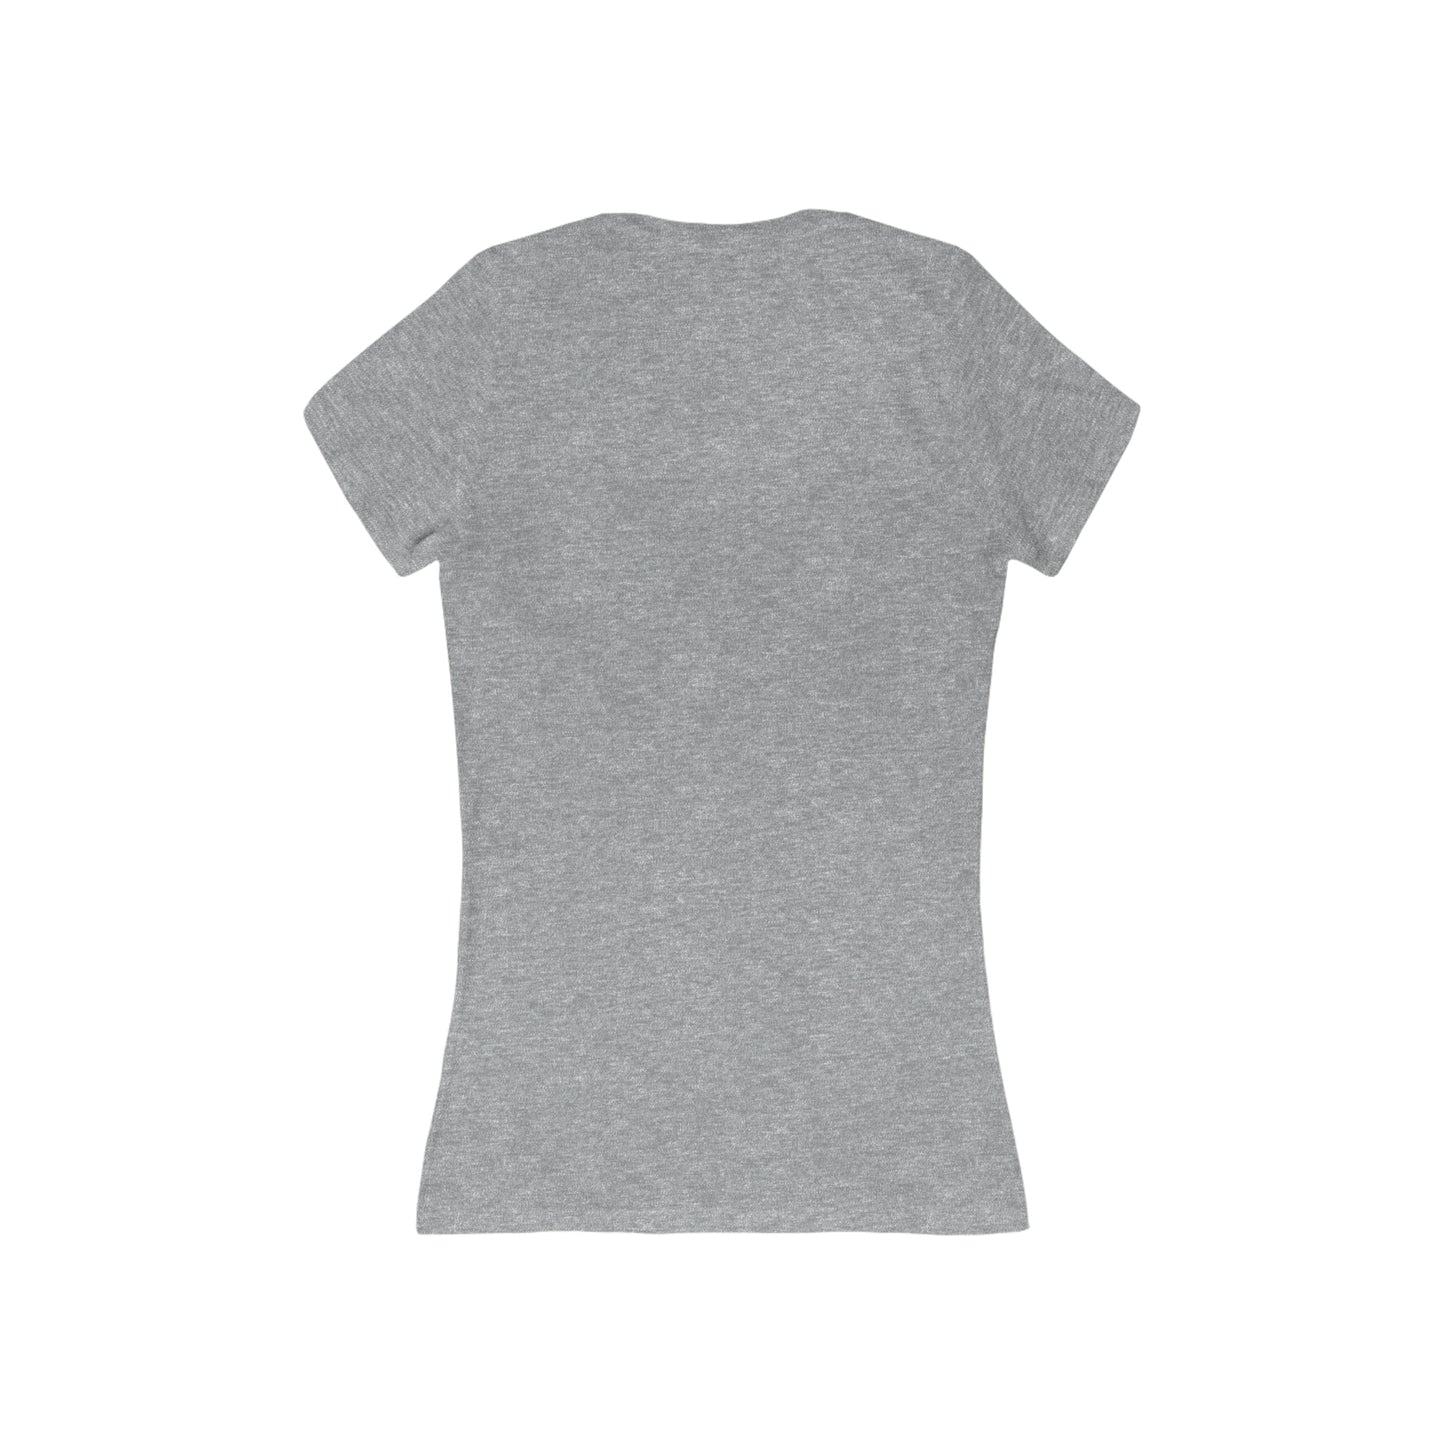 Too Busy Being Hermosa (Too Busy Being Beautiful) Women's Jersey Short Sleeve Deep V-Neck Tee